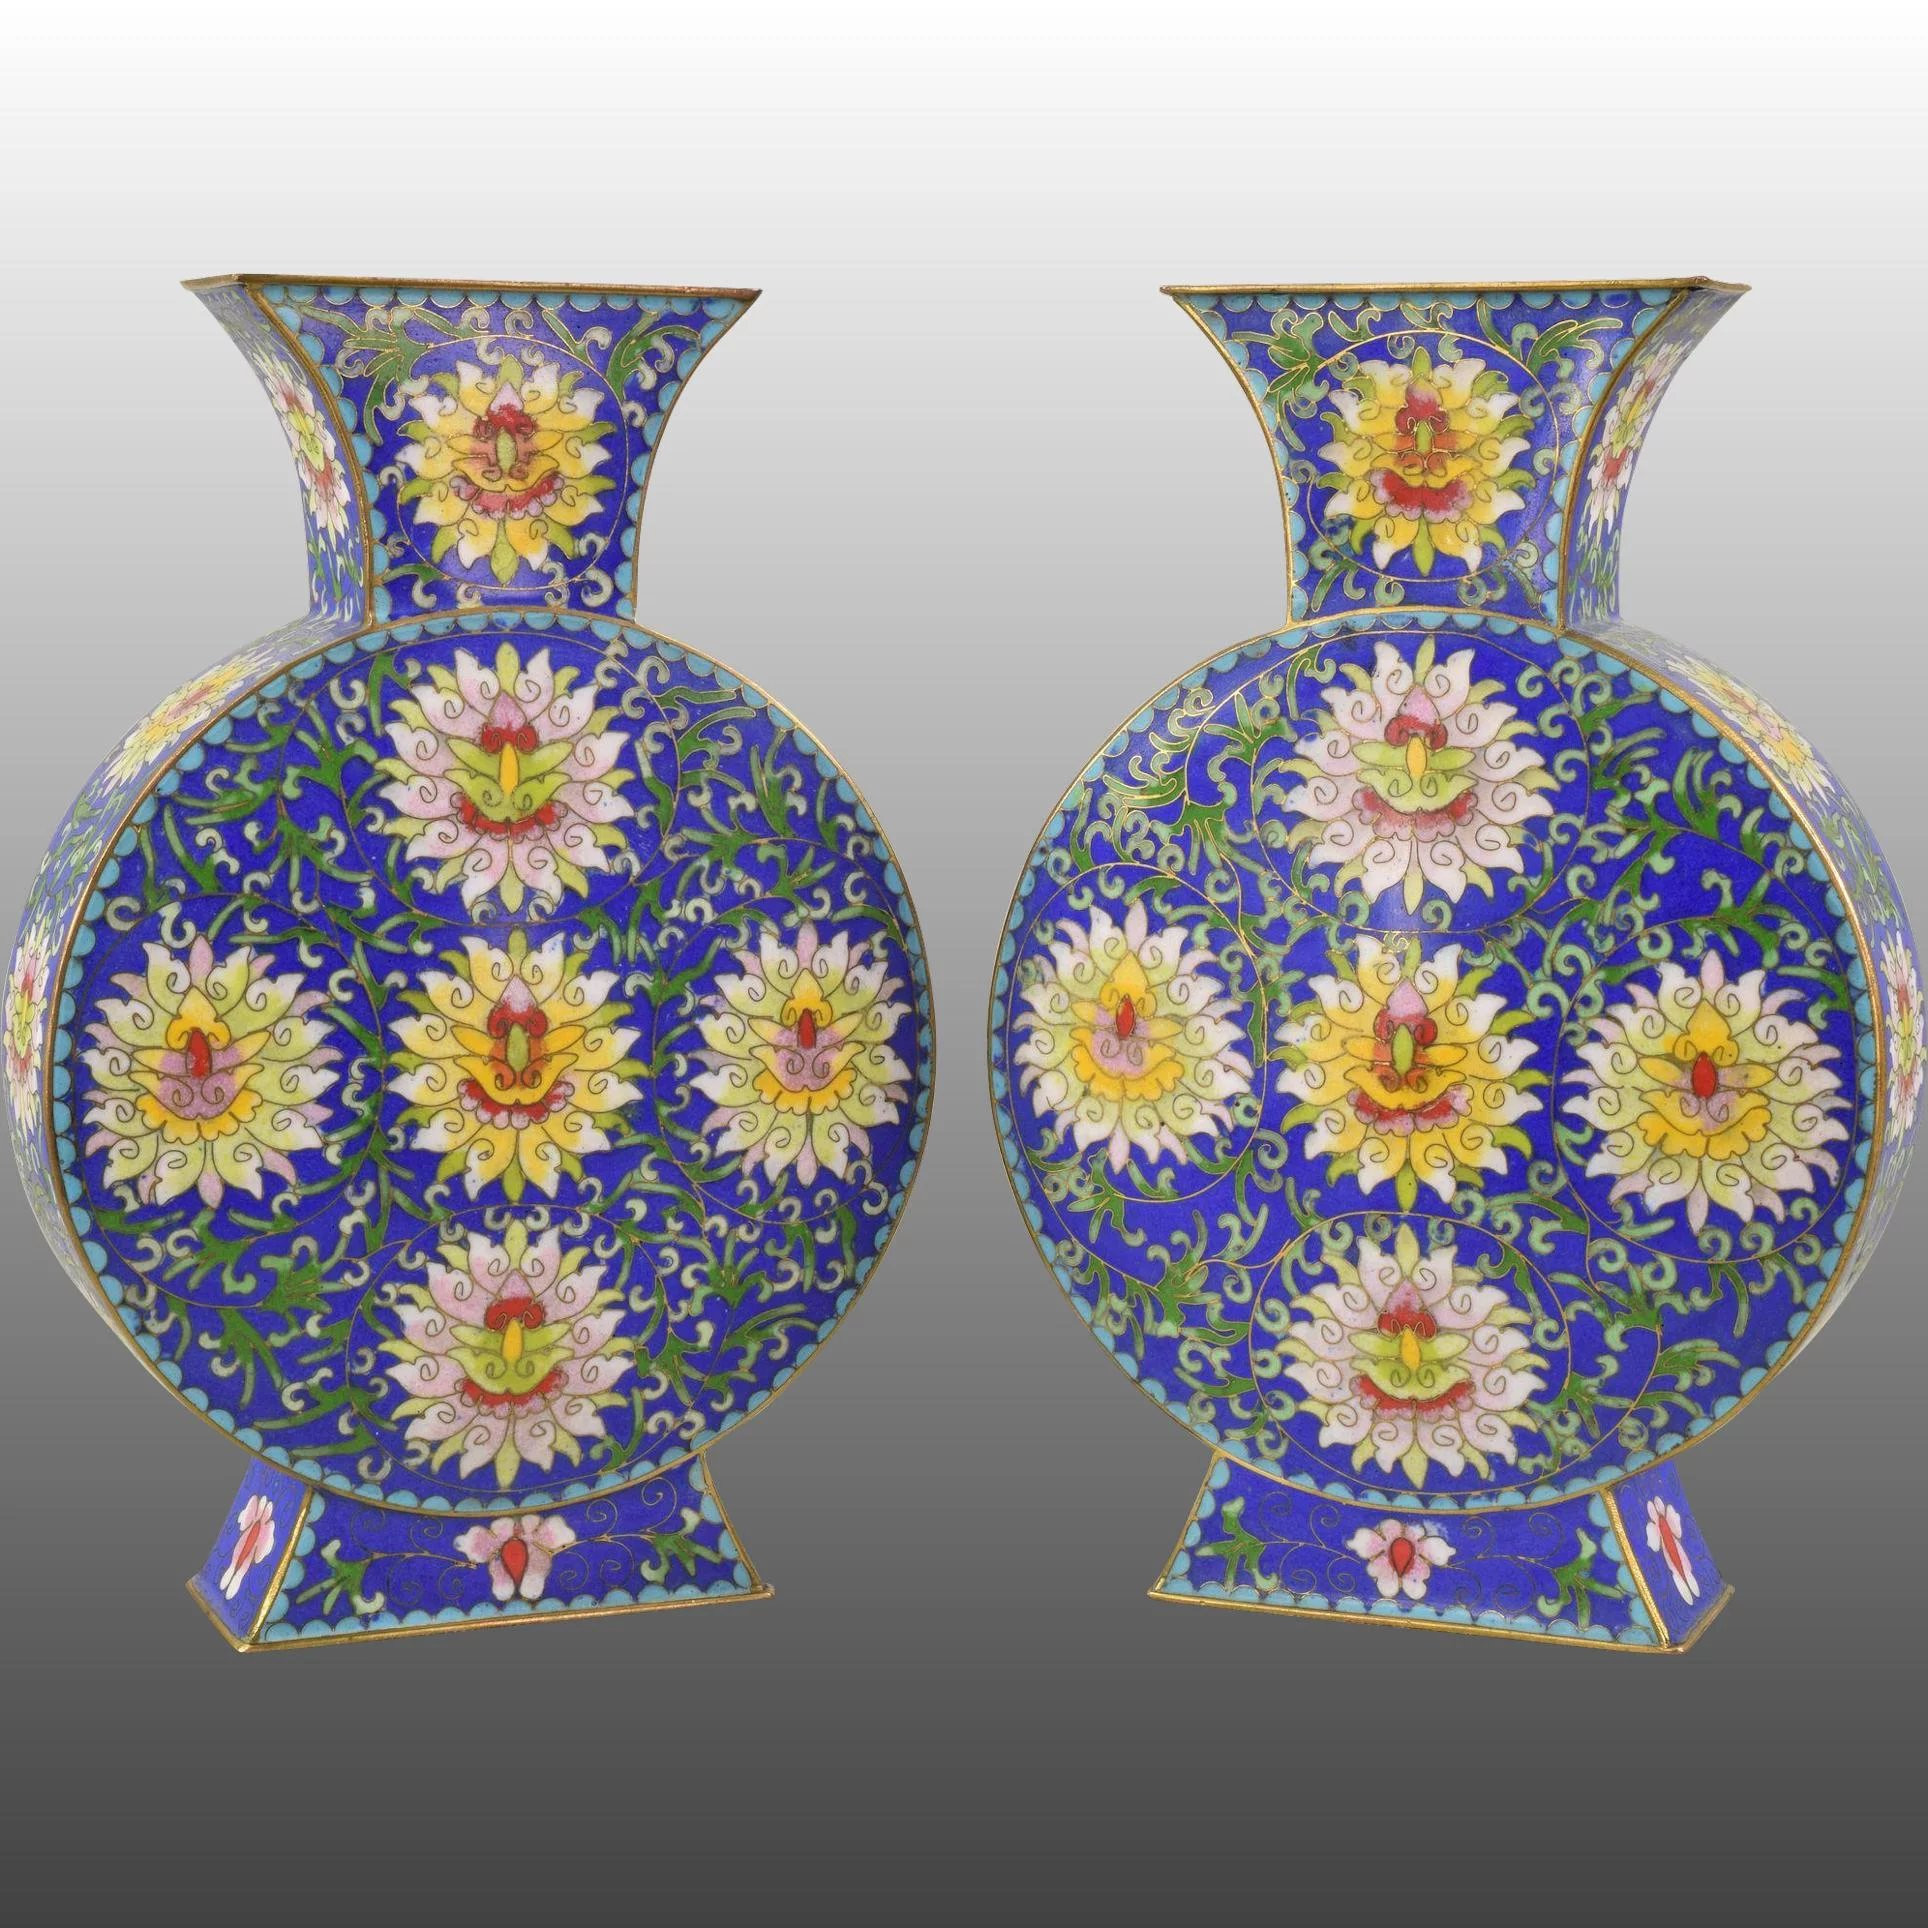 28 Great Pair Of Chinese Cloisonne Vases 2024 free download pair of chinese cloisonne vases of pair vintage petite blue cloisonne pillow type vases with yellow throughout click to expand